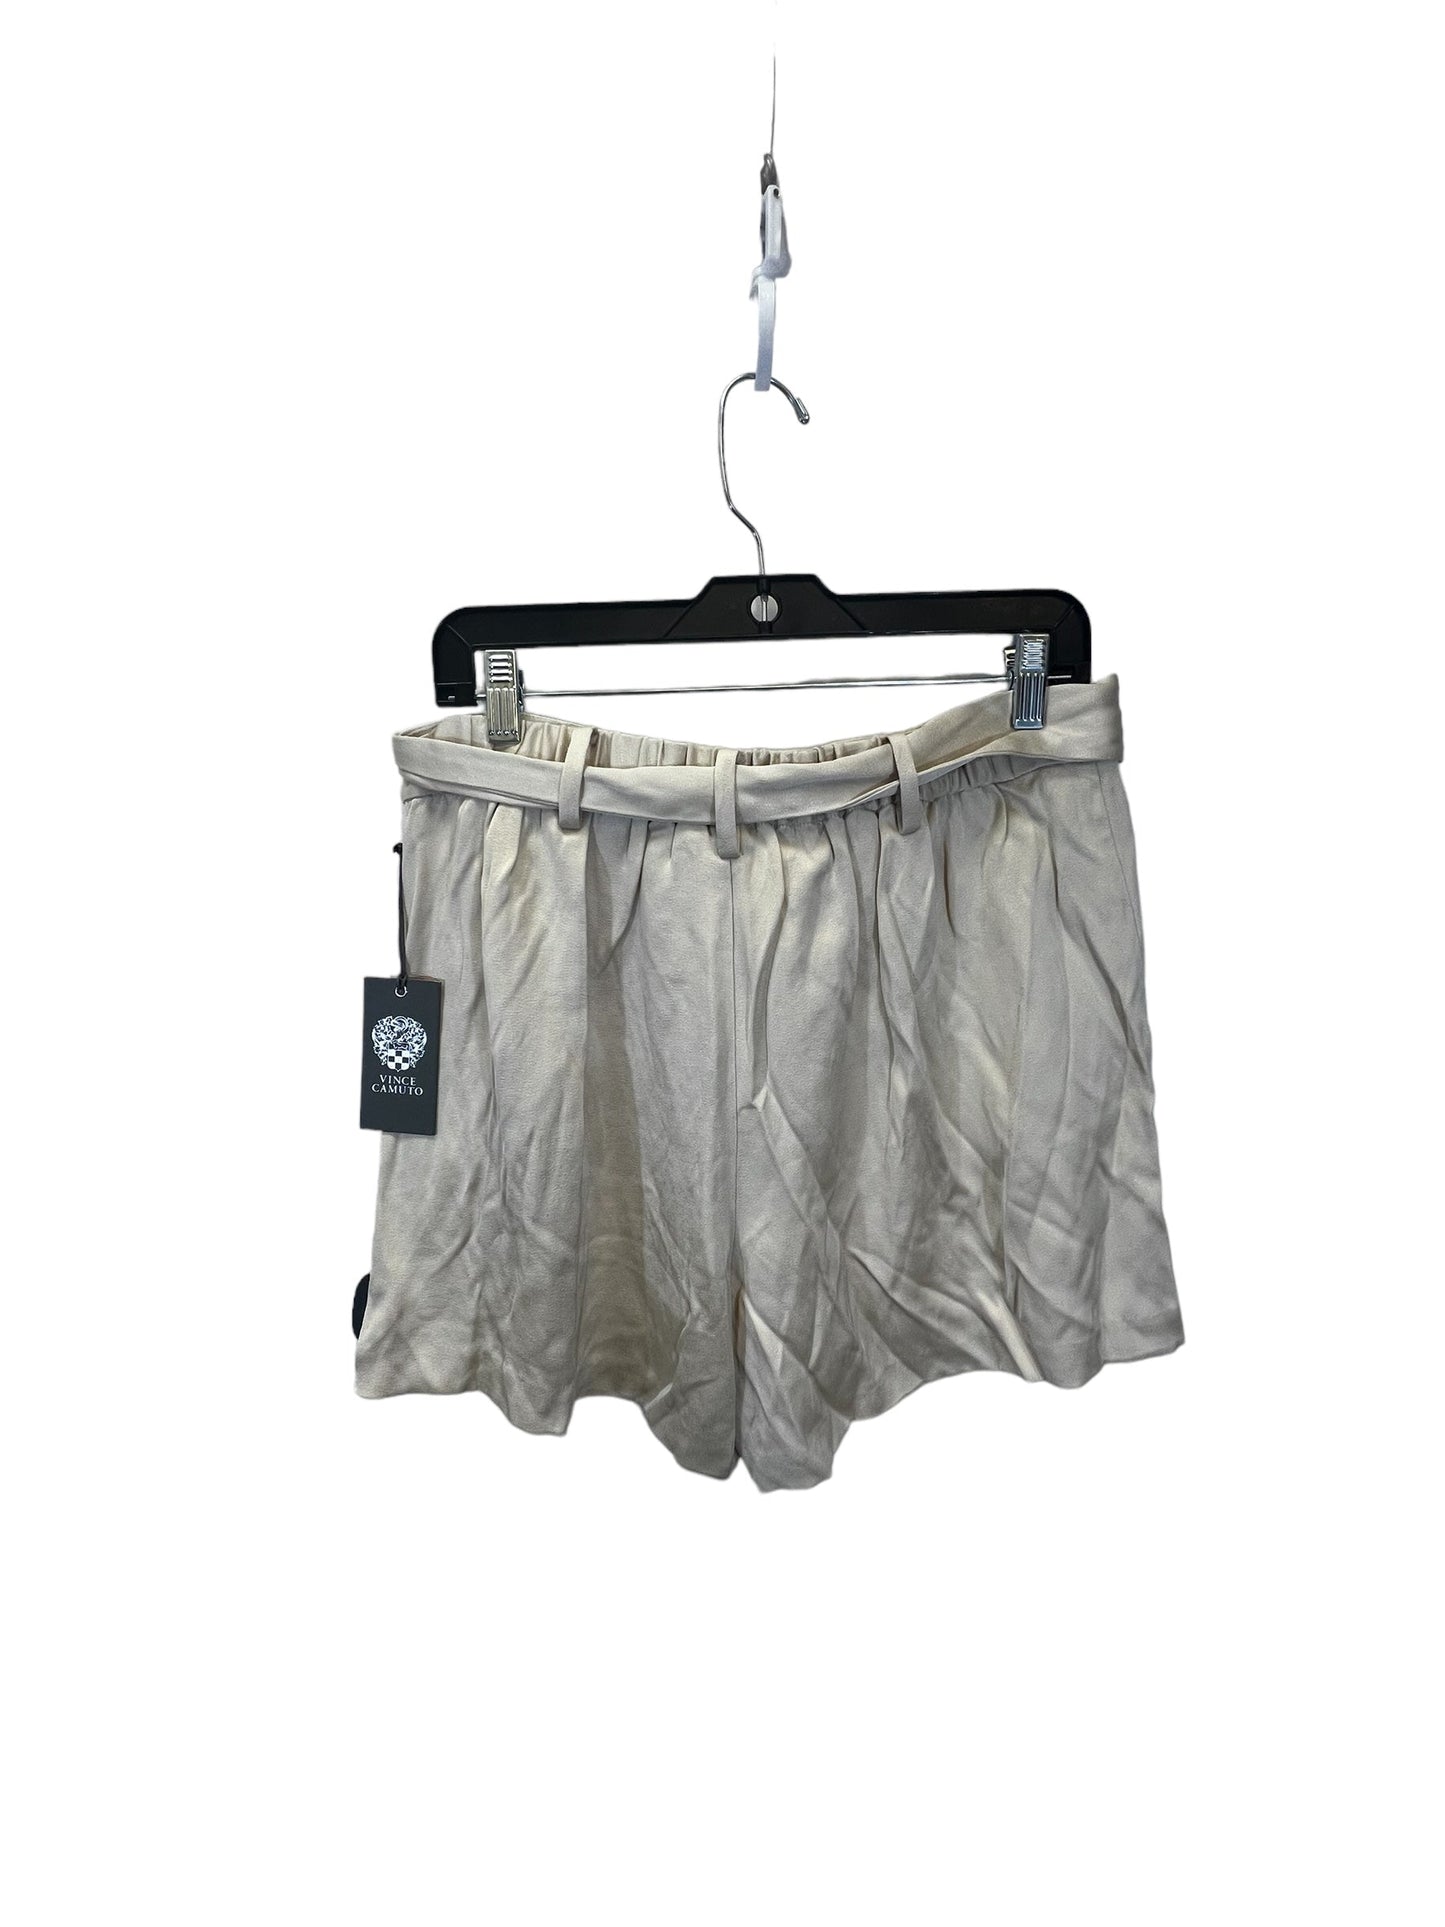 Tan Shorts Vince Camuto, Size M